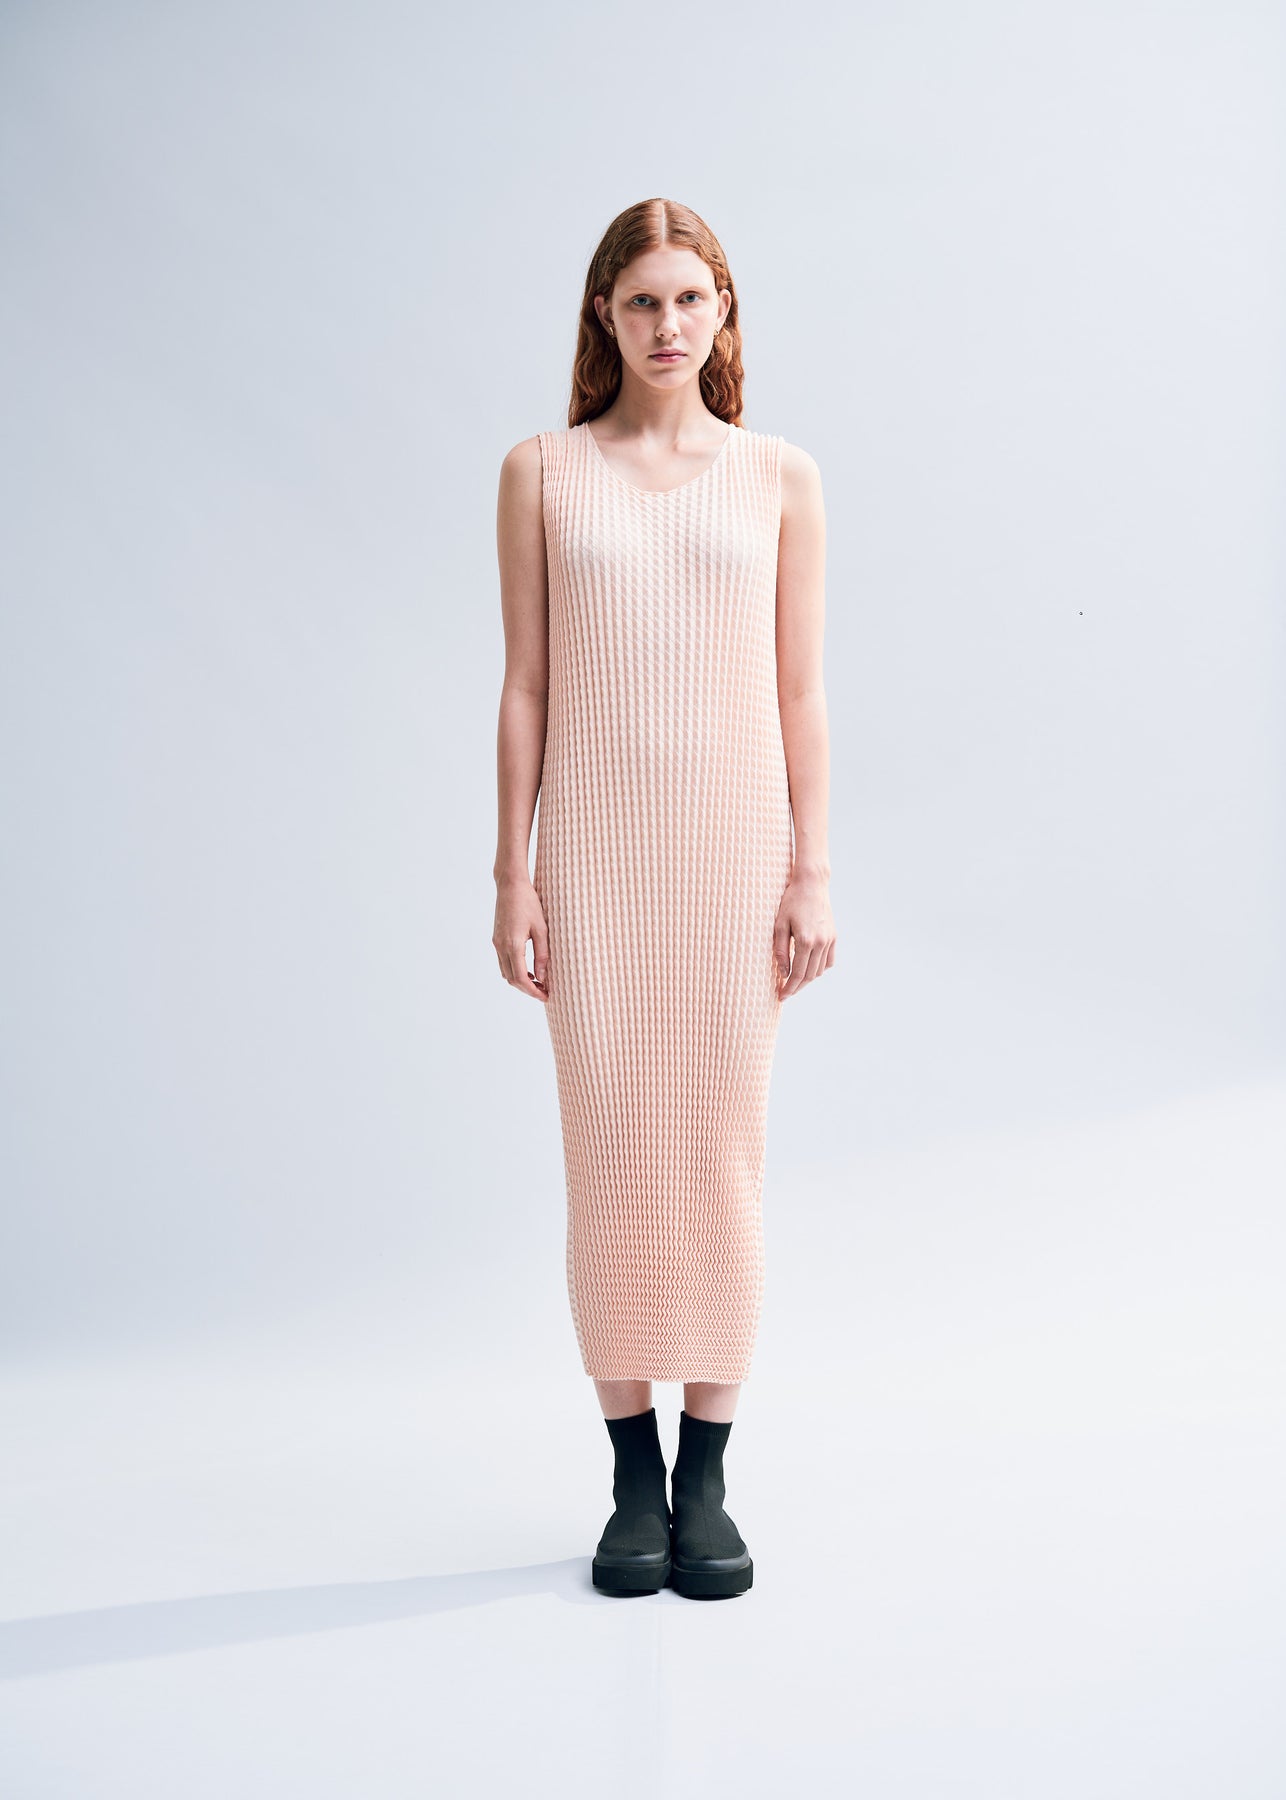 SPONGY-36 DRESS | The official ISSEY MIYAKE ONLINE STORE | ISSEY